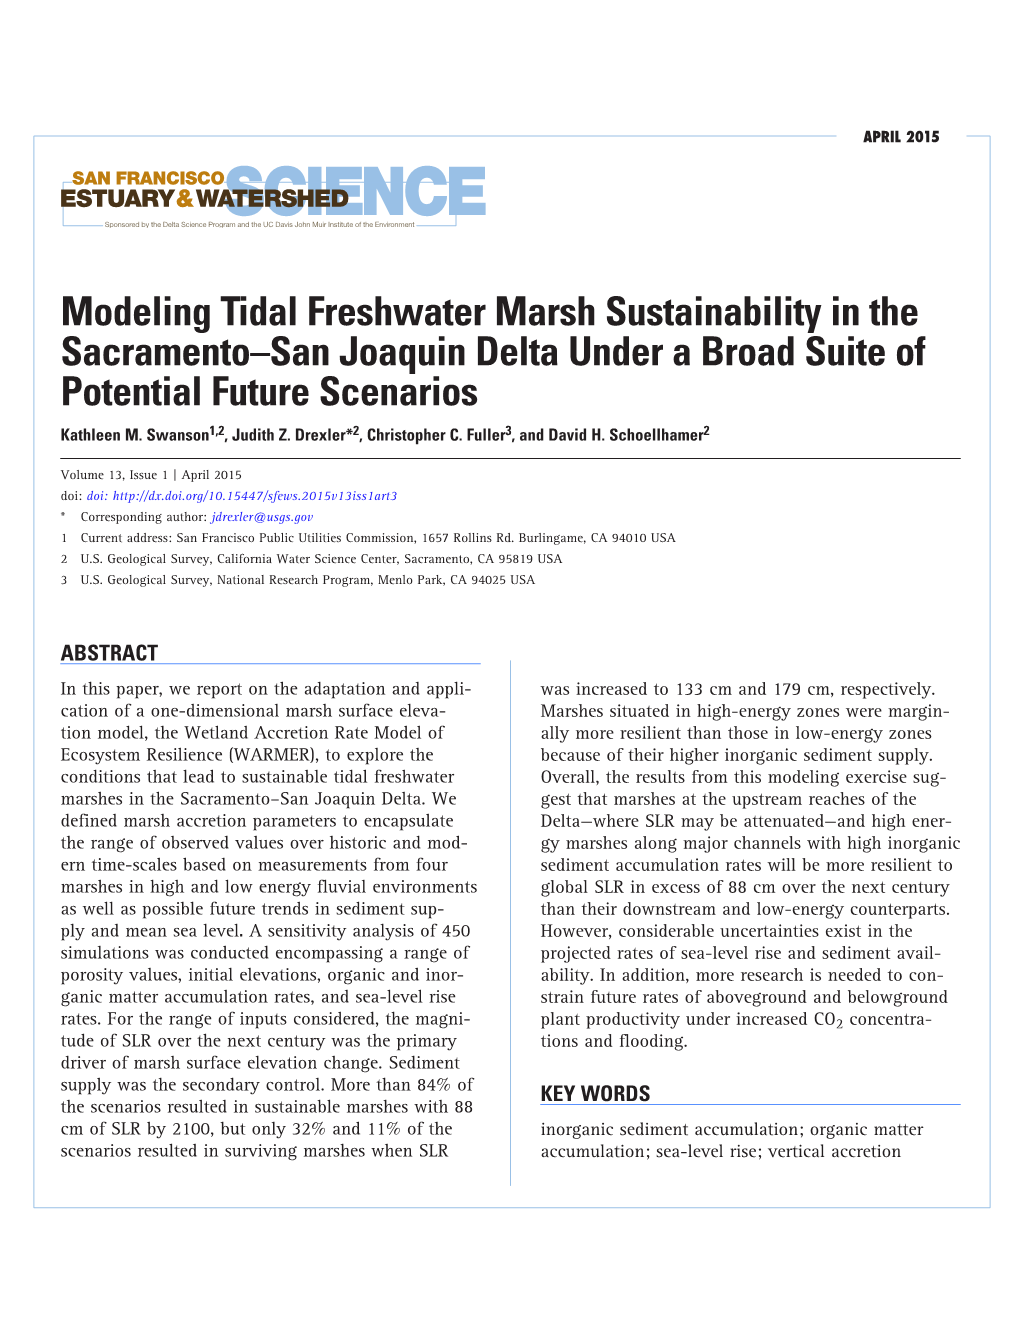 Modeling Tidal Freshwater Marsh Sustainability in the Sacramento–San Joaquin Delta Under a Broad Suite of Potential Future Scenarios Kathleen M